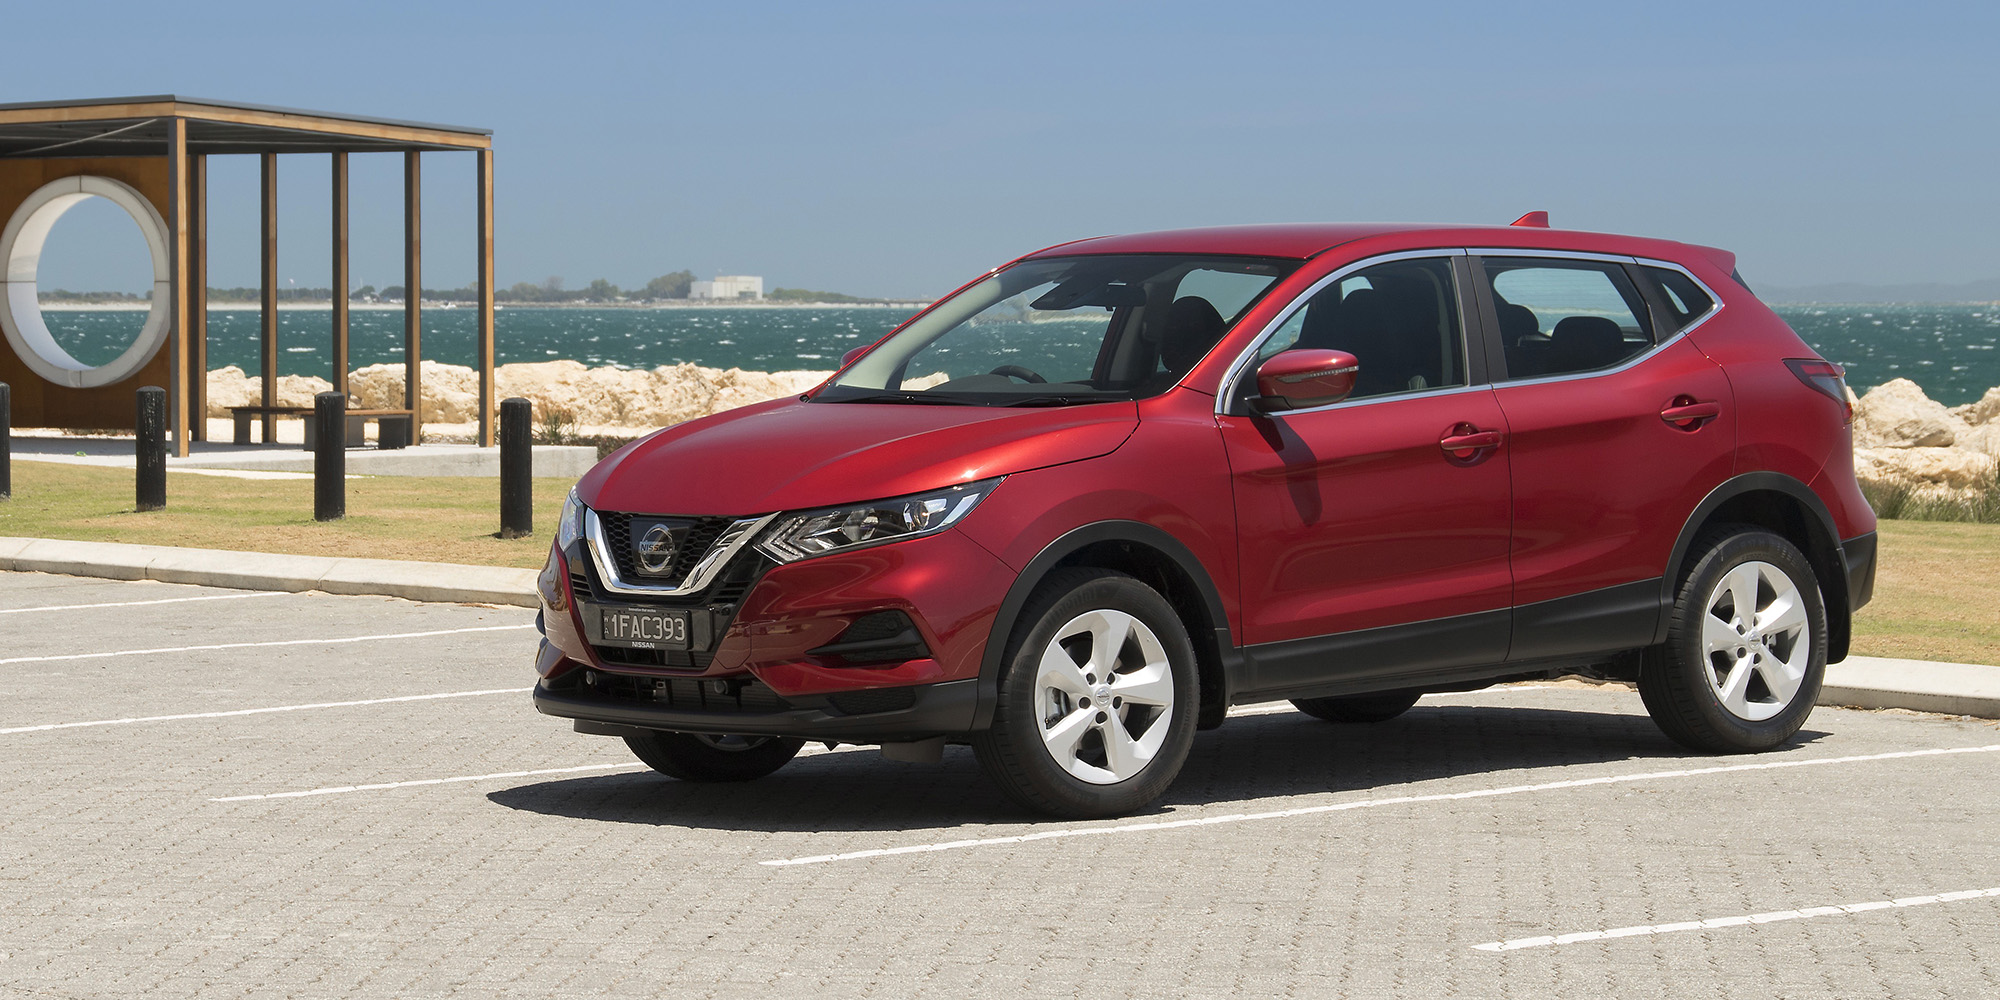 2018 Nissan Qashqai pricing and specs - Photos (1 of 10)